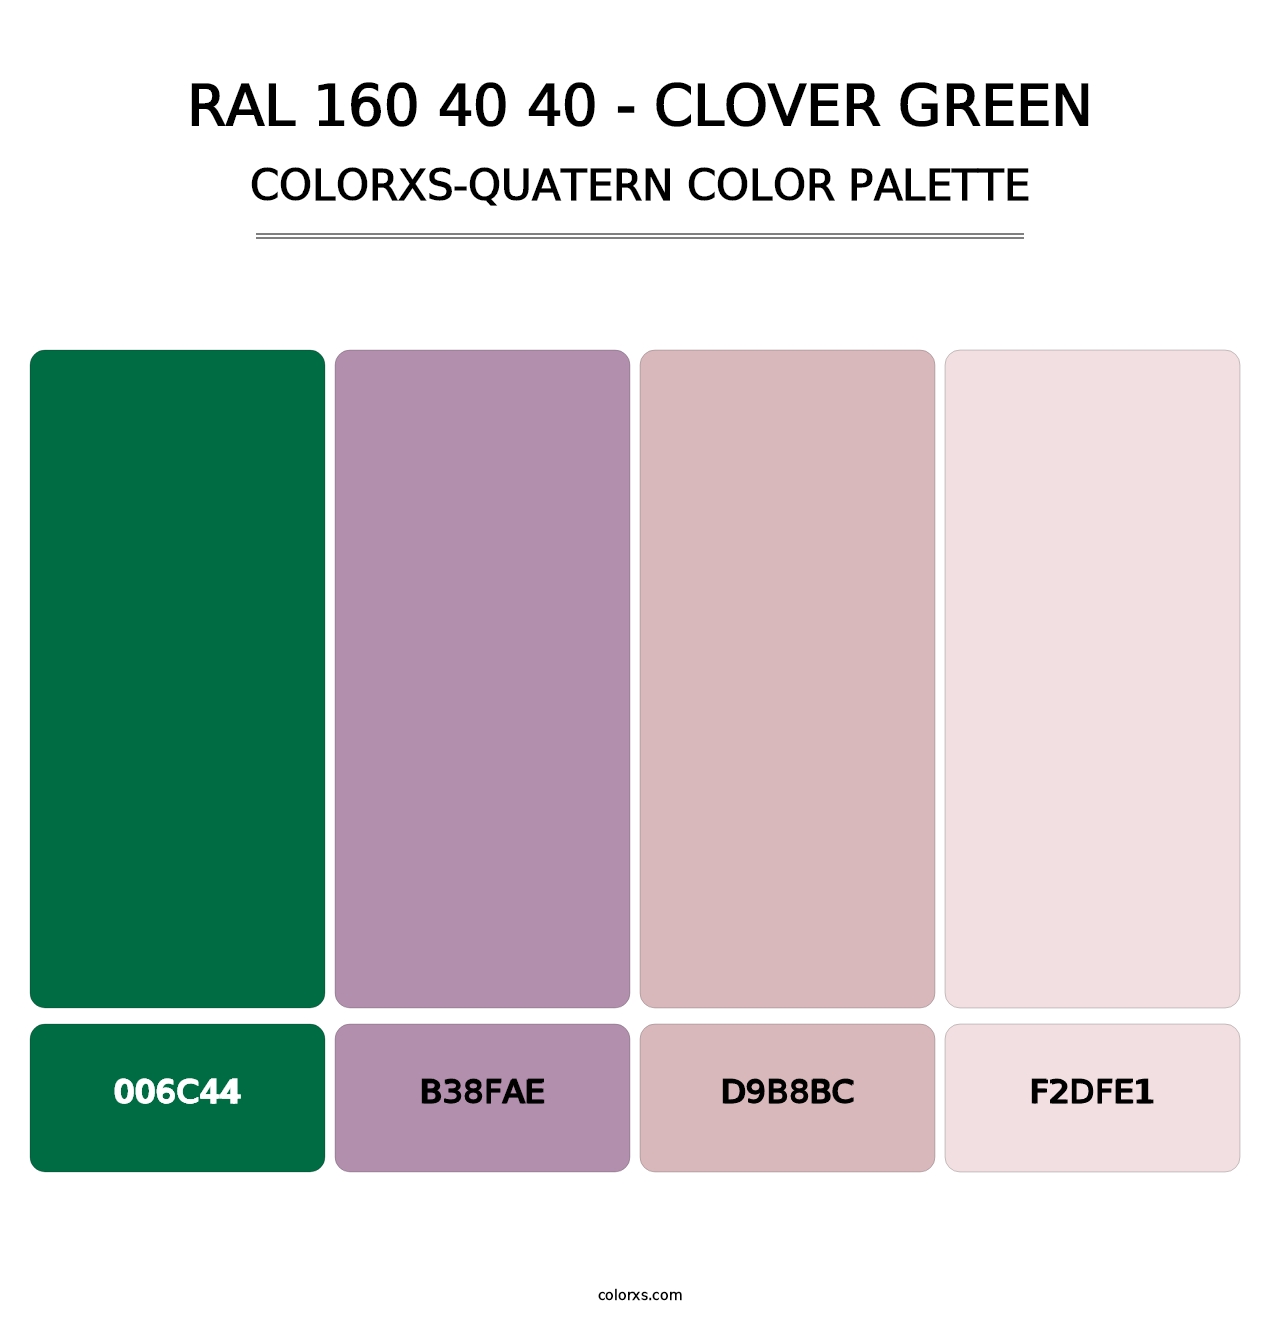 RAL 160 40 40 - Clover Green - Colorxs Quatern Palette